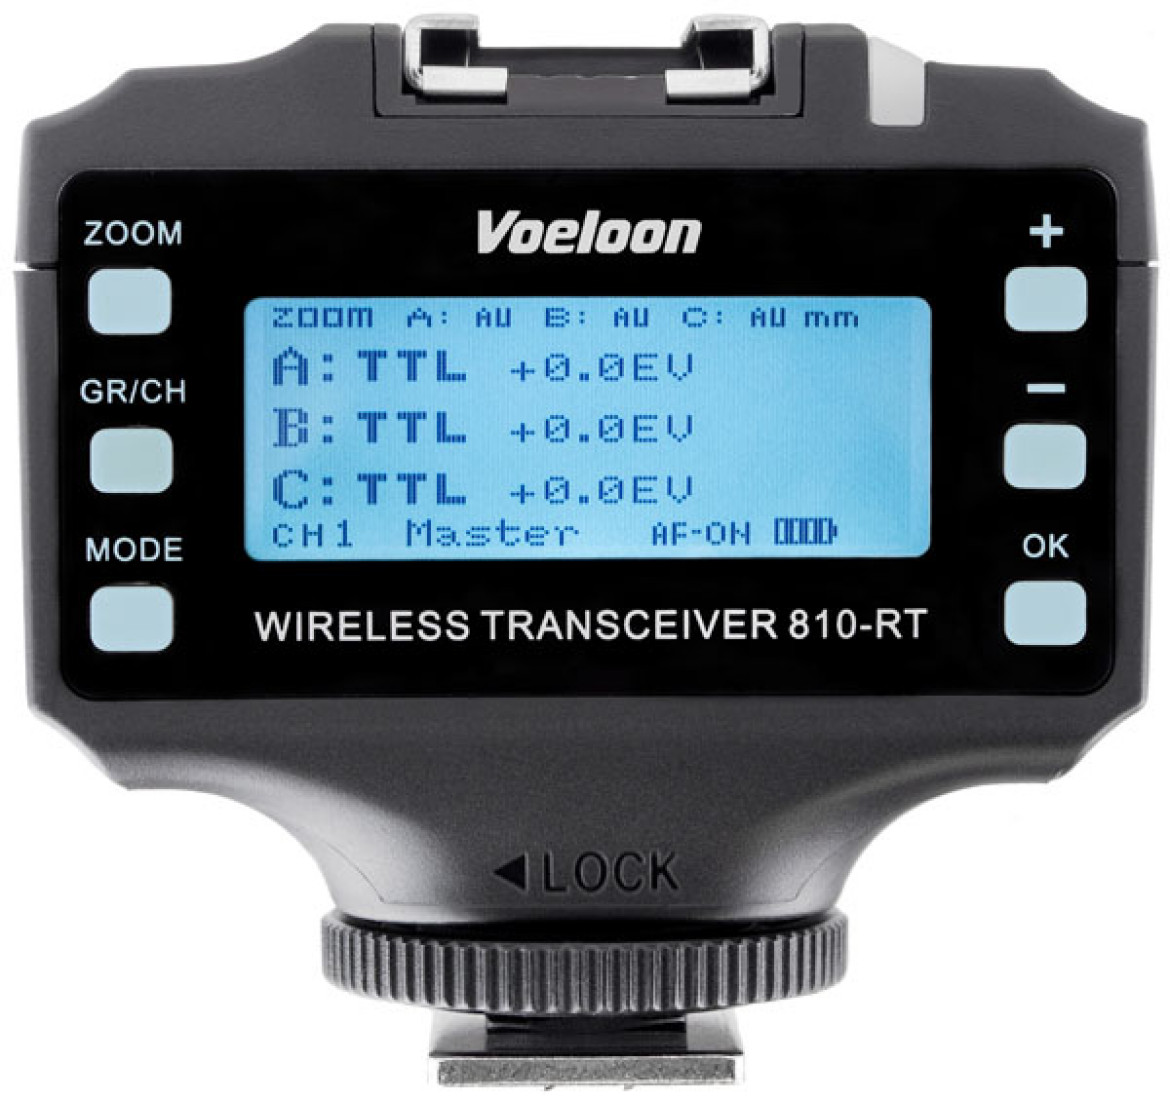 Voeloon 810-RT